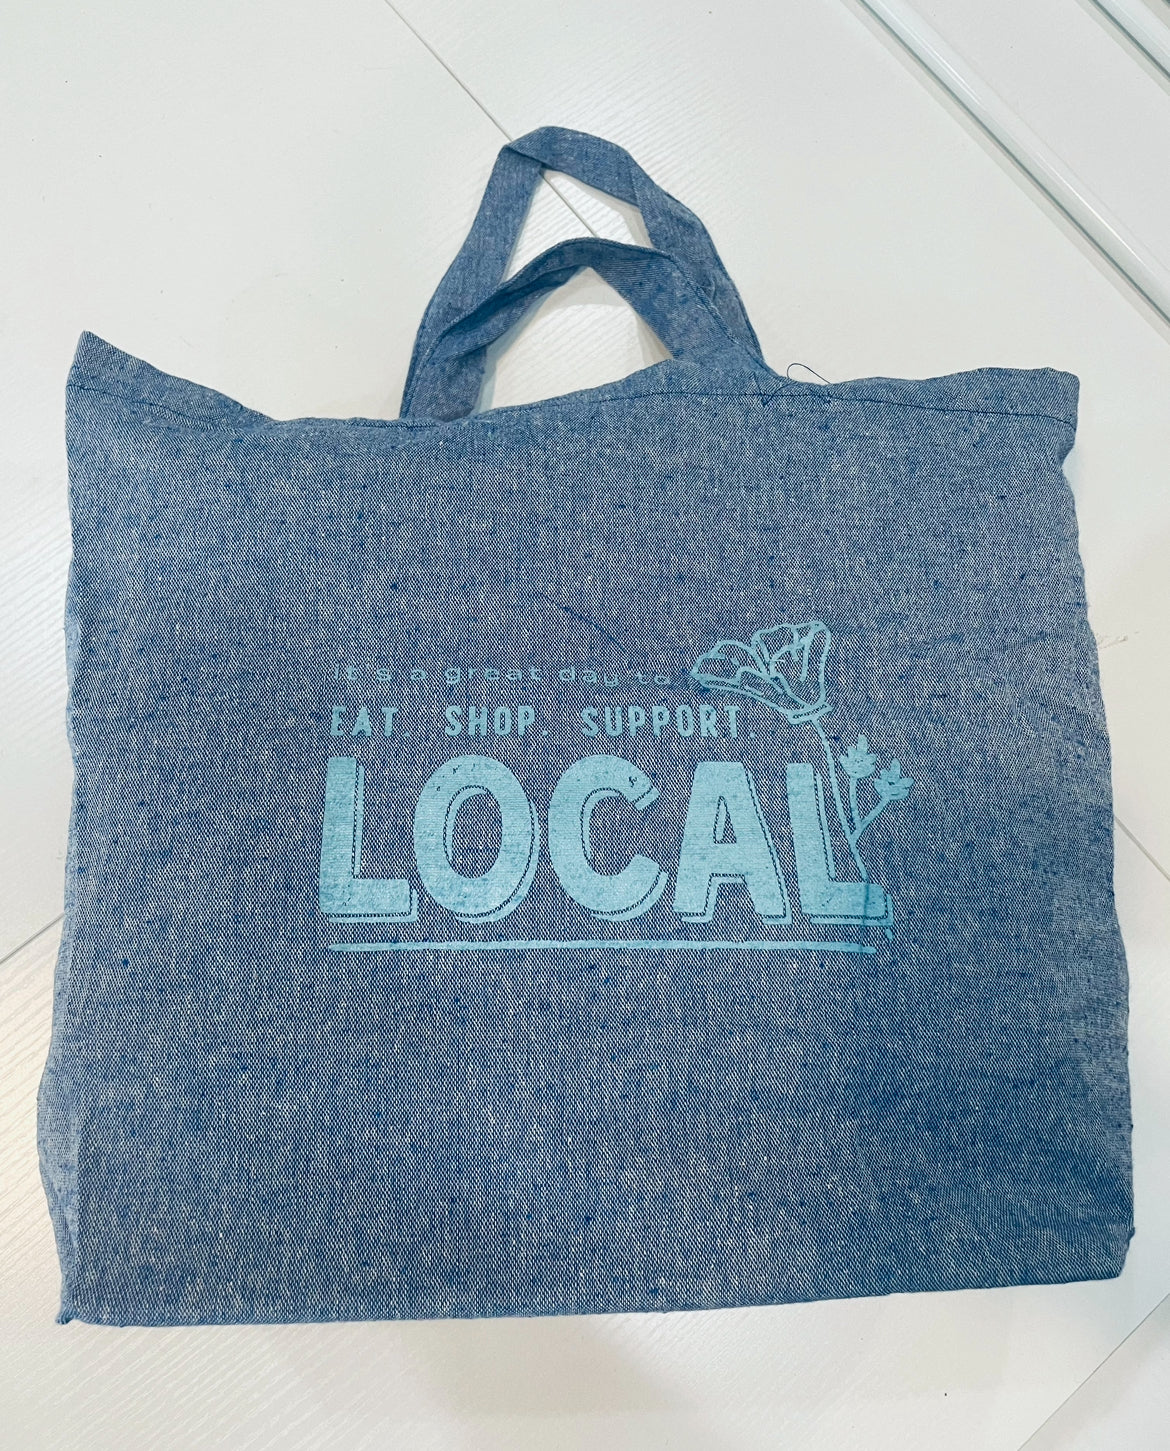 Recycled Twill Tote | Great Day to Eat. Shop. Support. Local